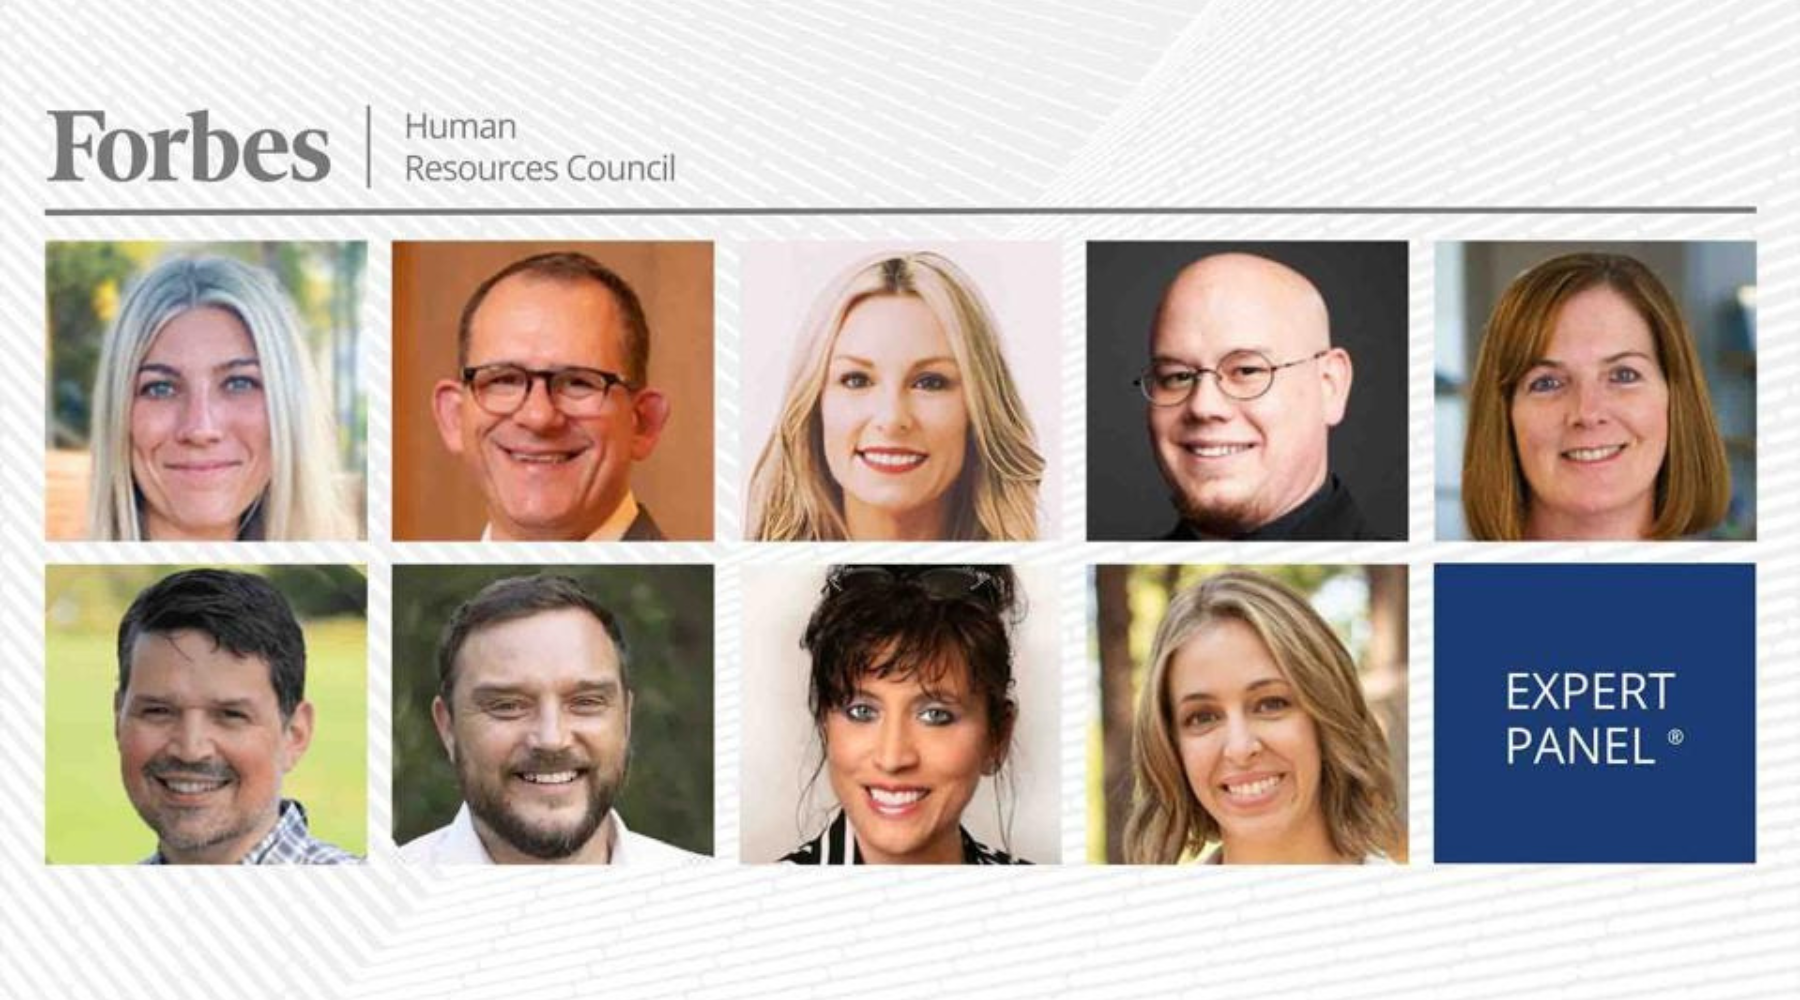 Nine members of Forbes Human Resources Council